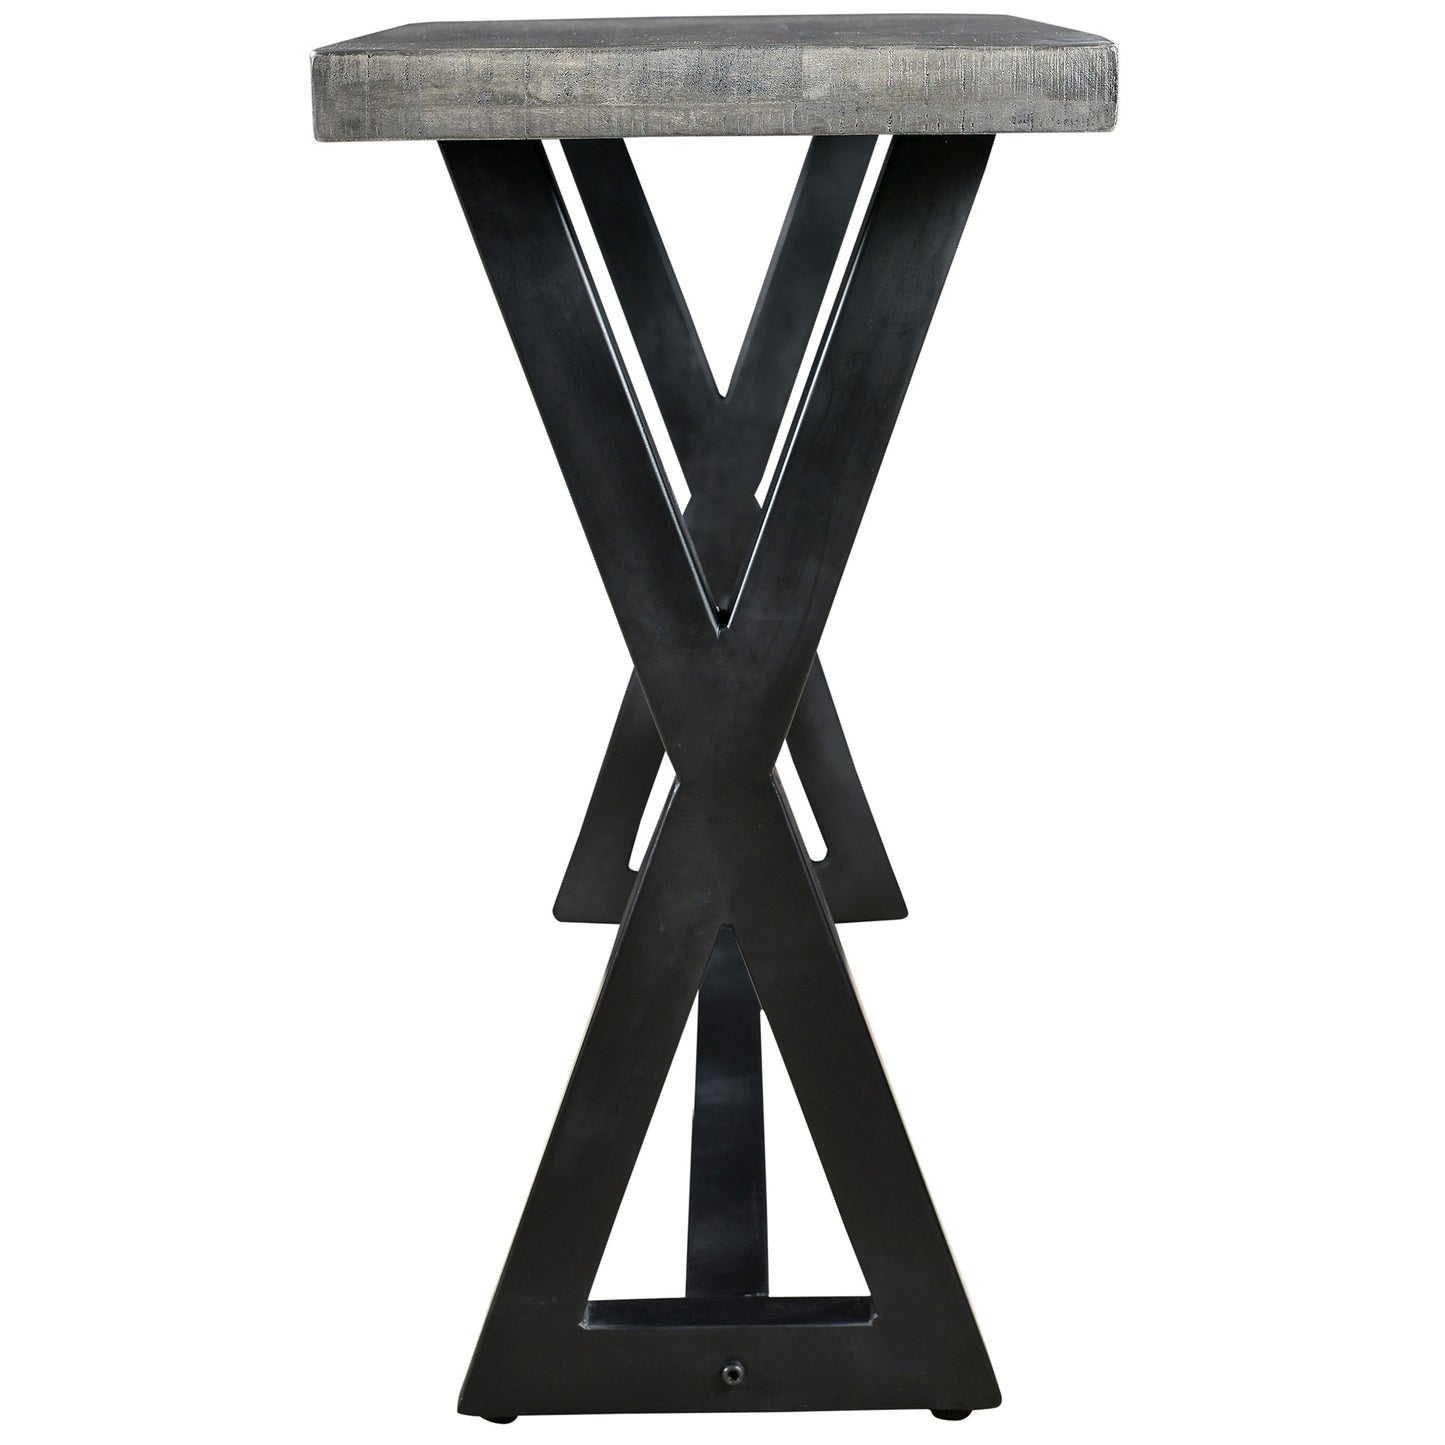 Zax Console Table in Distressed Grey